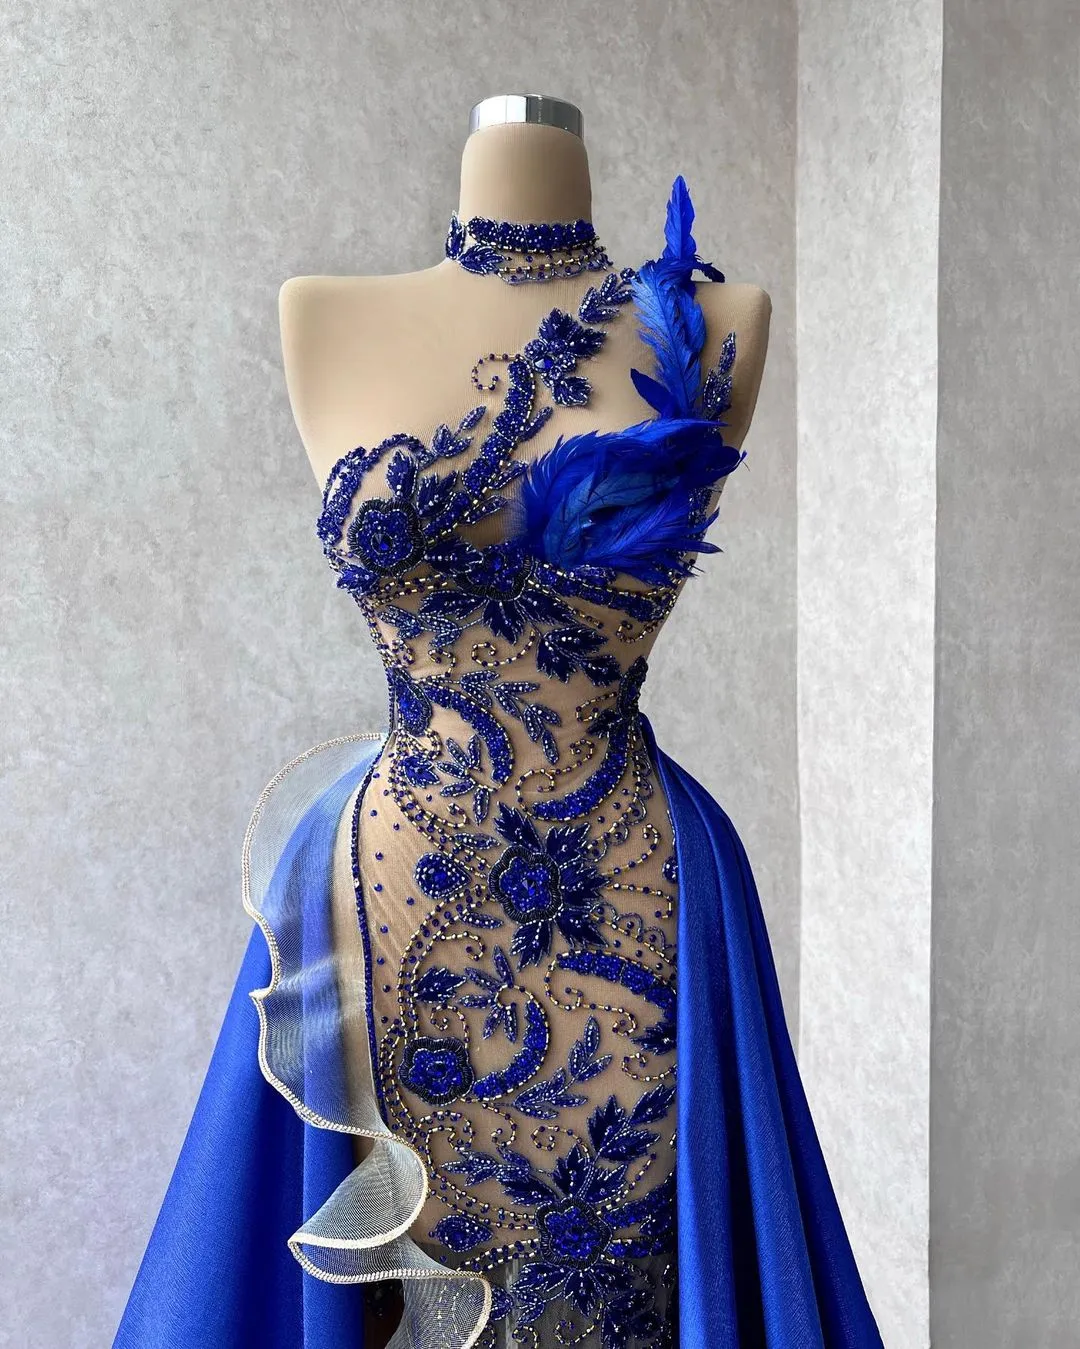 Exquisite Blue Feathers Prom Dresses Beads Crystals Sheer Neck Party Dresses Illusion with Overskirts Custom Made Evening Dress